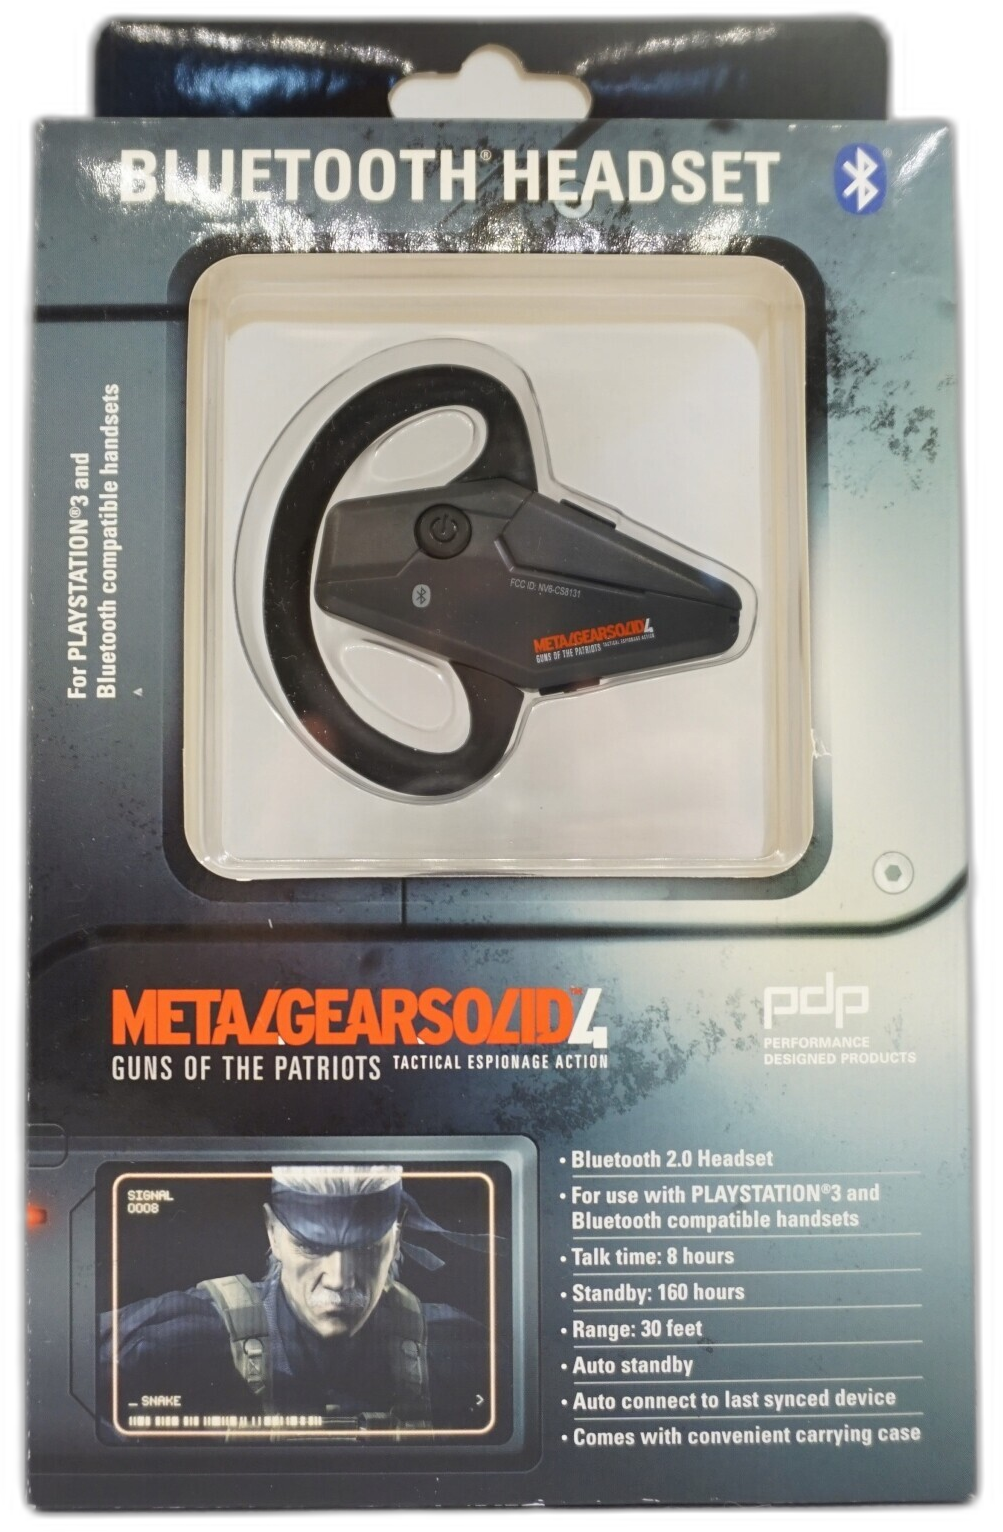  PDP PlayStation 3 Metal Gear Solid 4 Bluetooth Headset